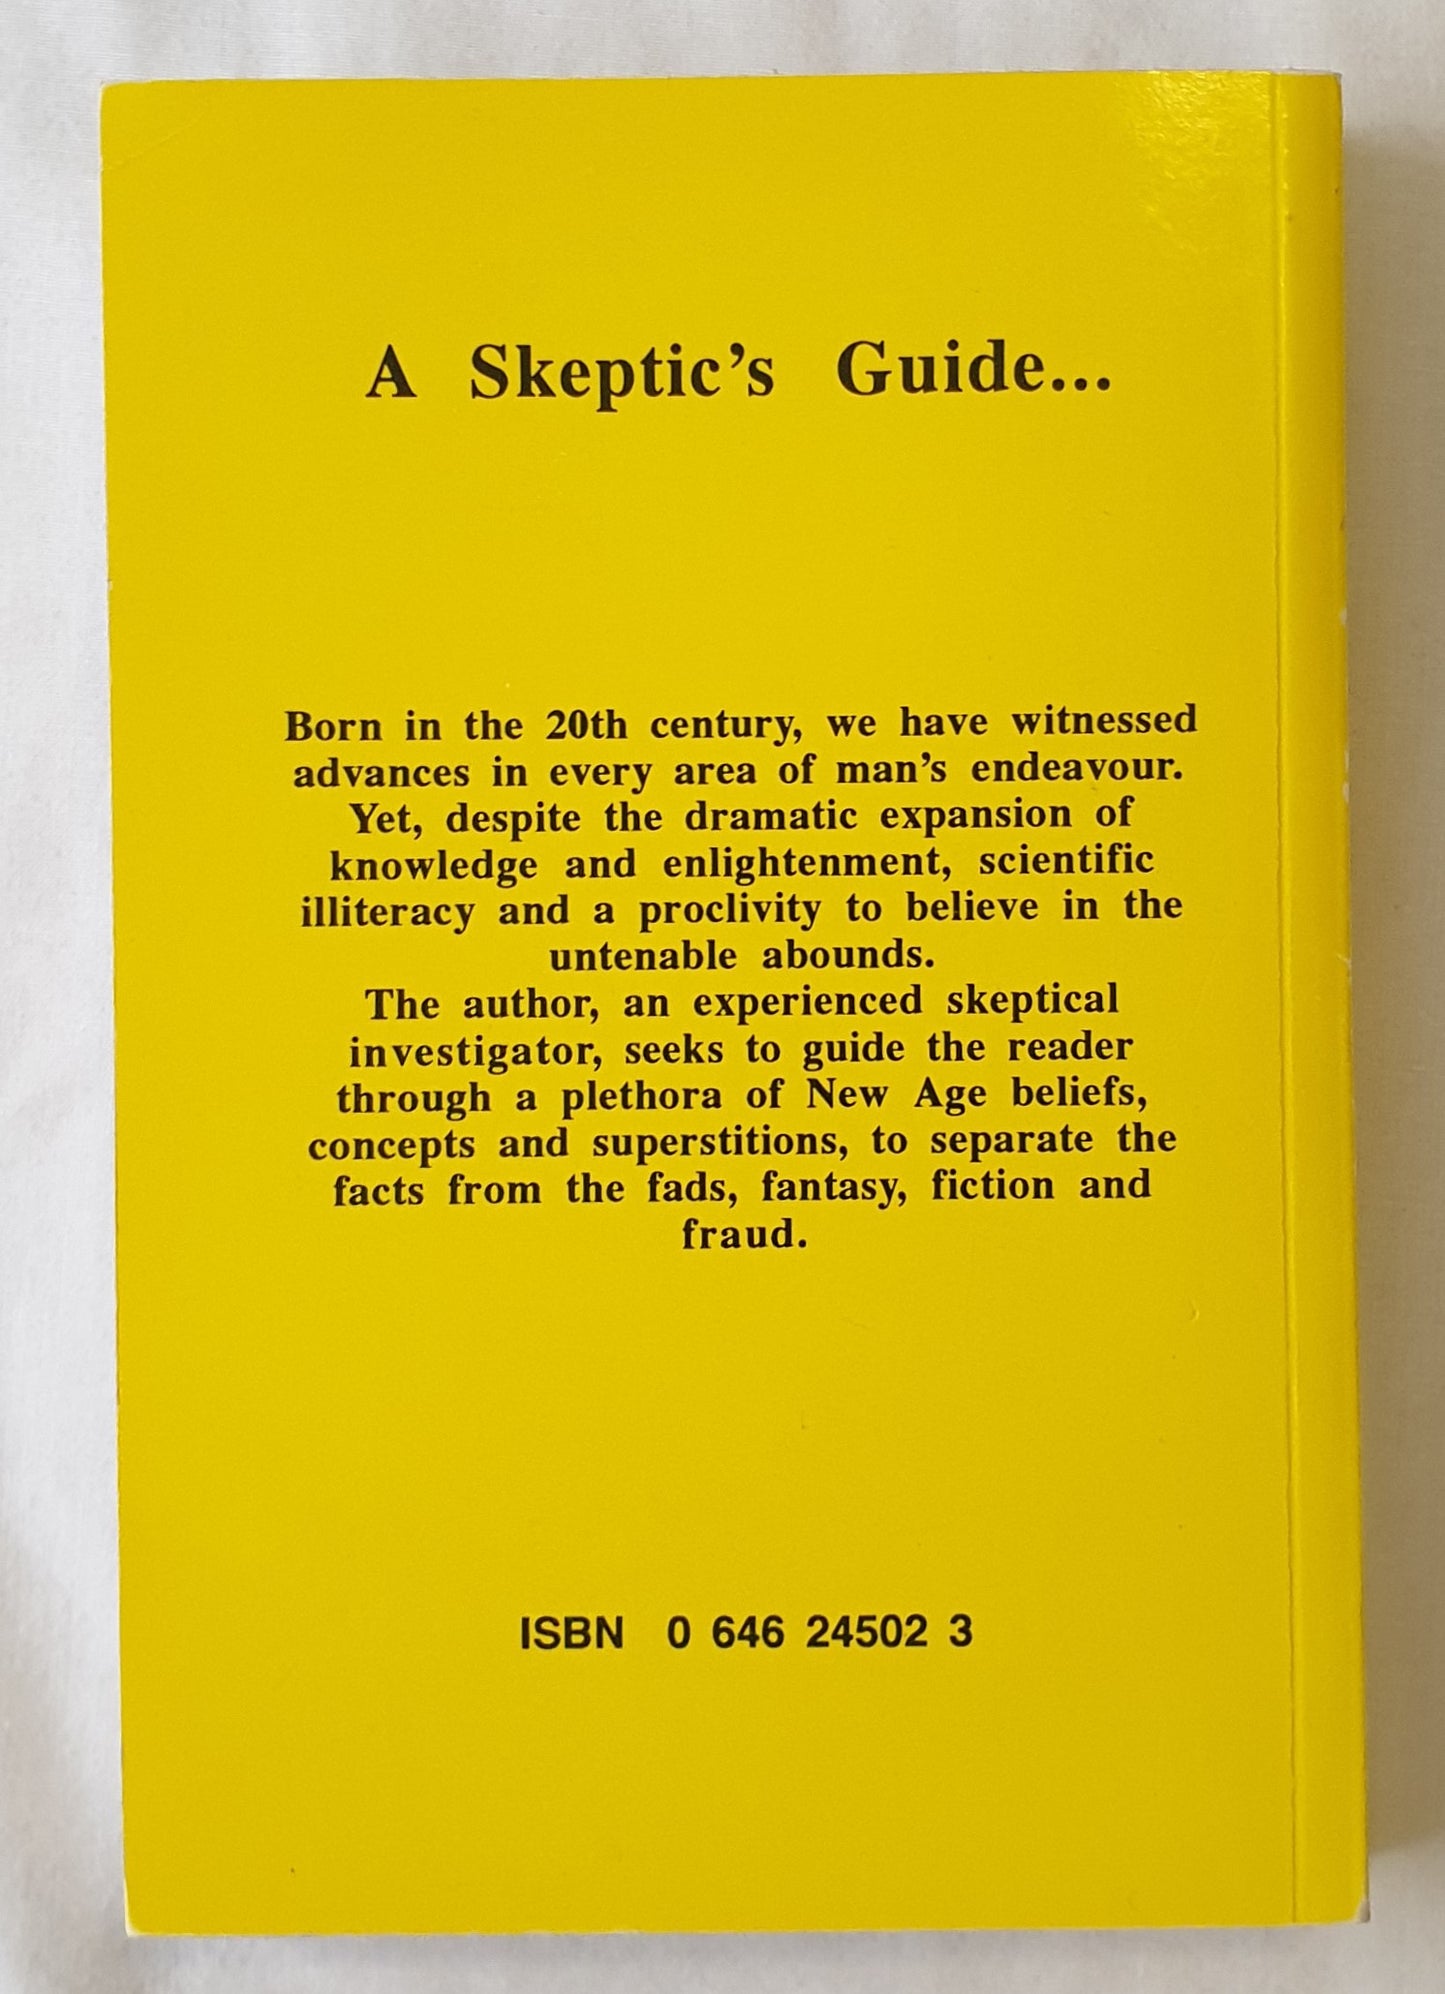 A Skeptic’s Guide to the New Age by Harry Edwards